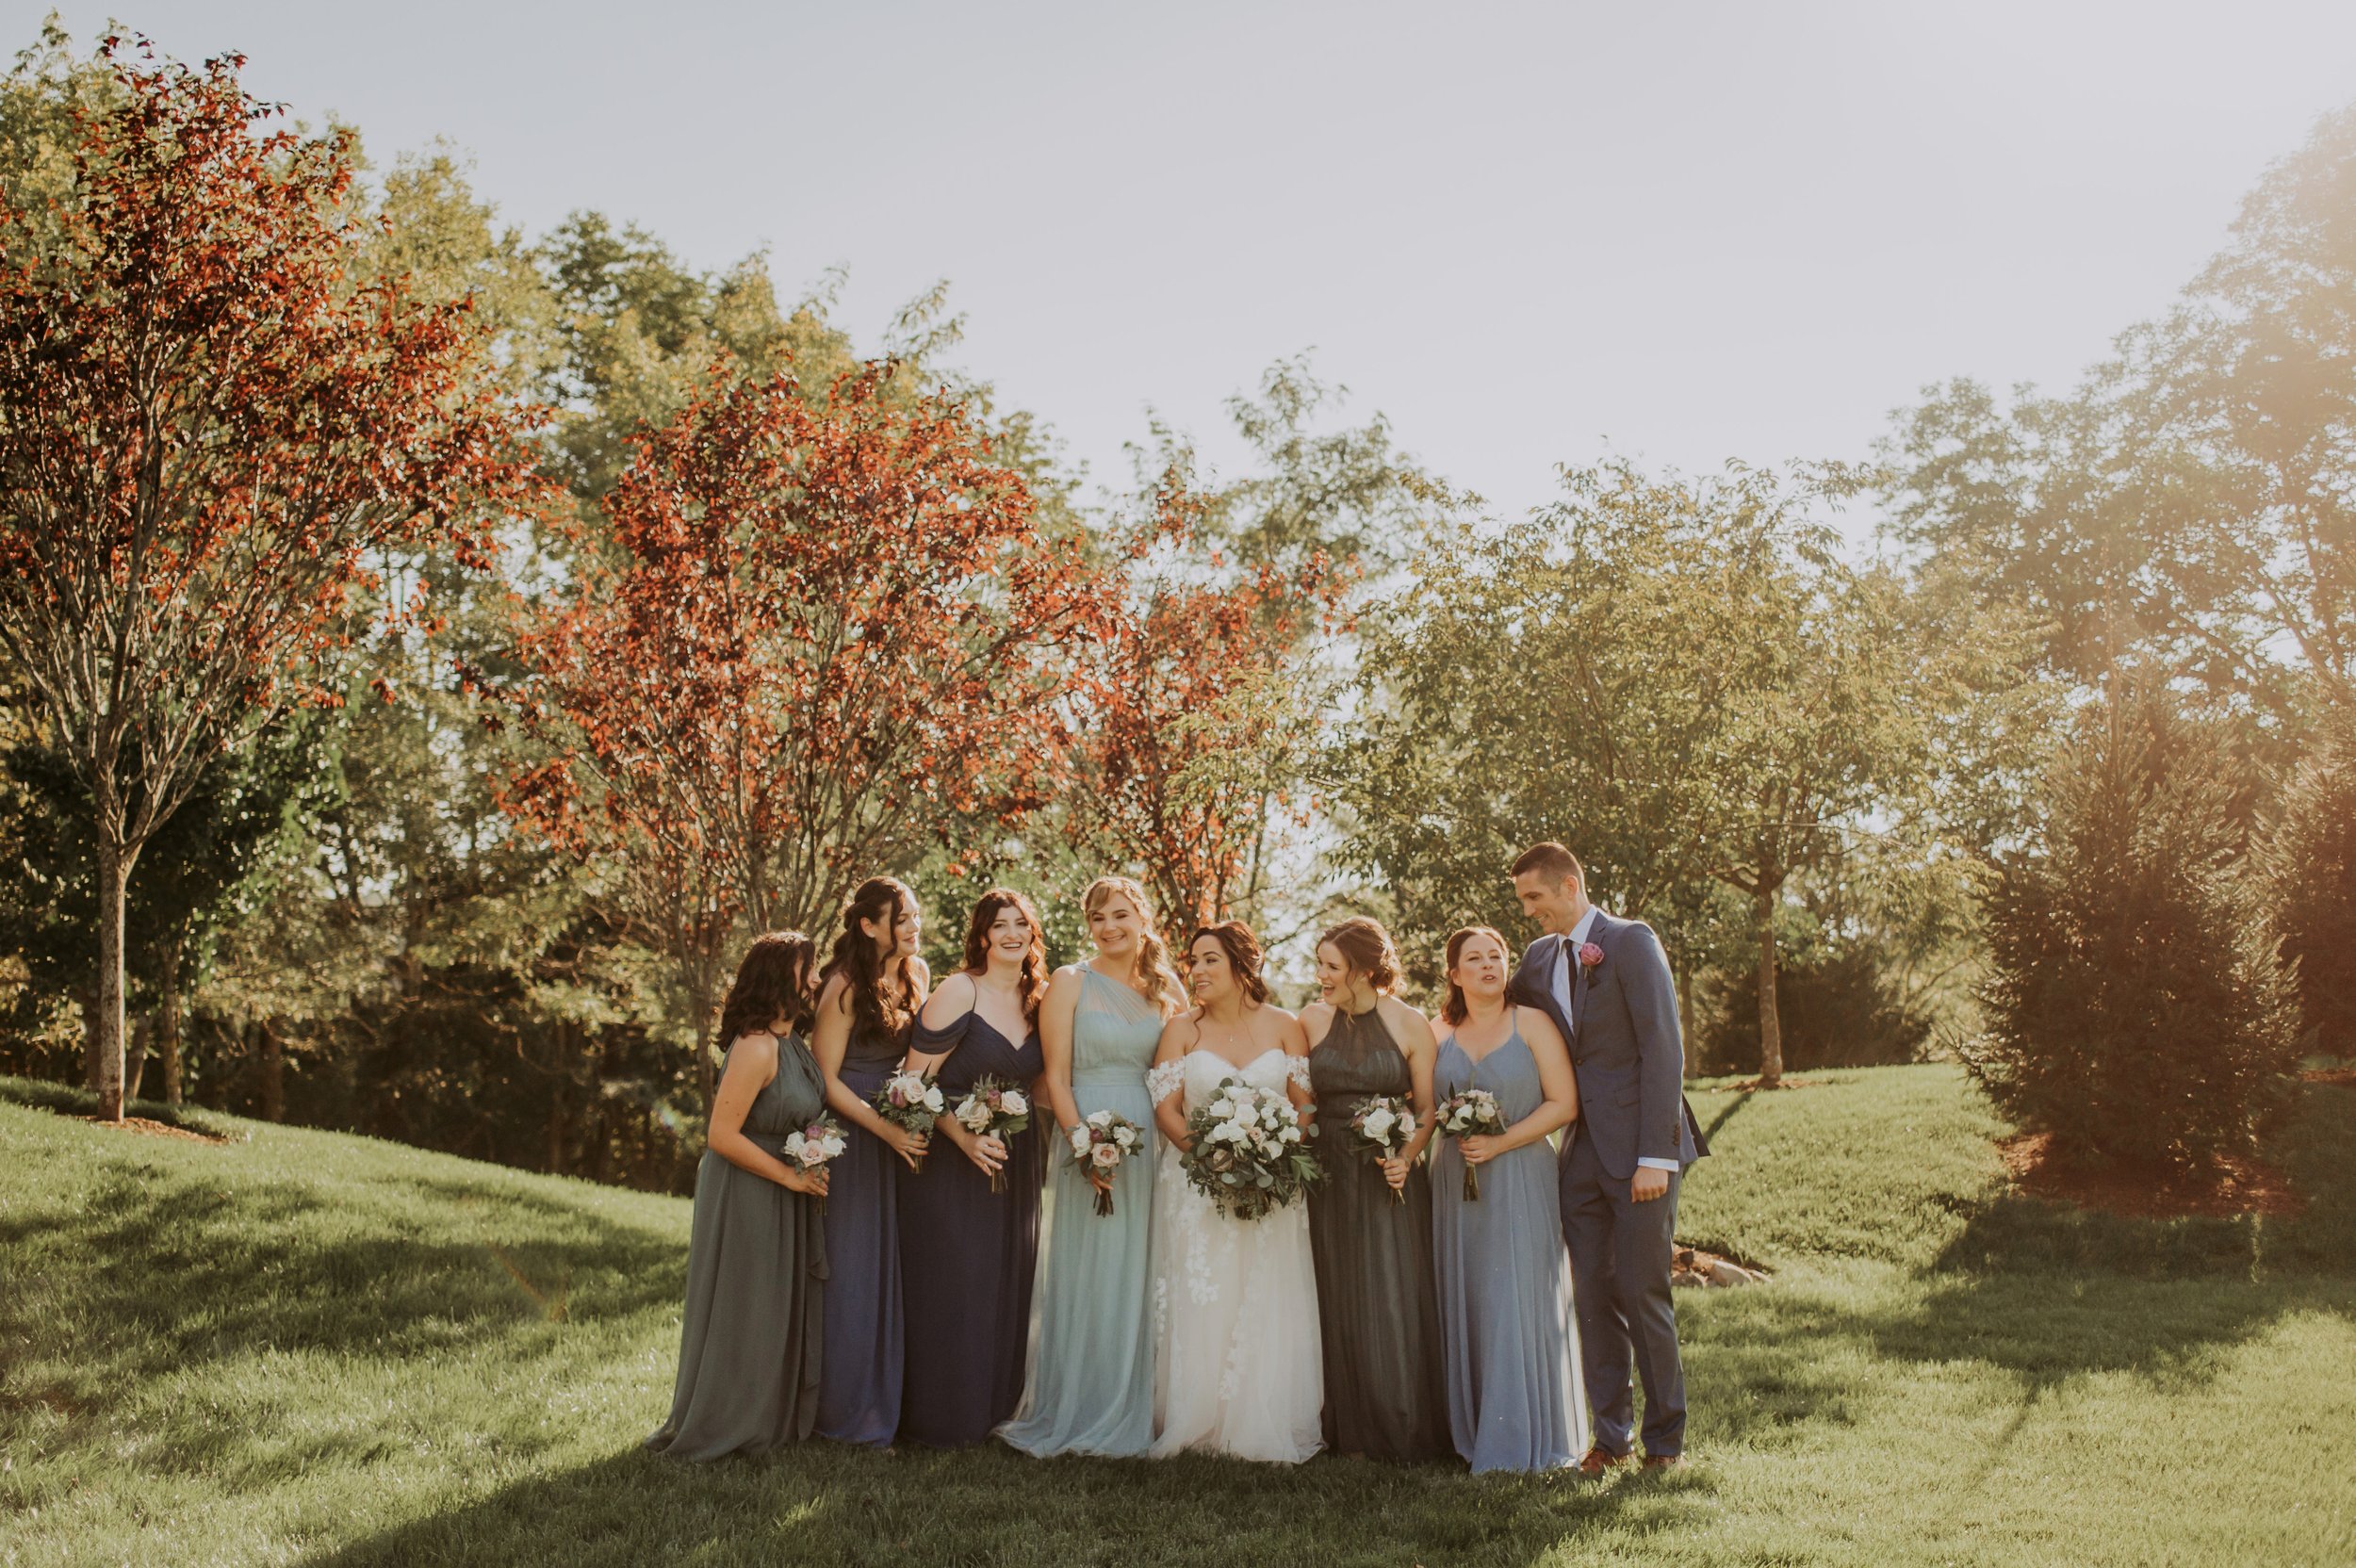 Connection Photography | A Touch of Elegance Events